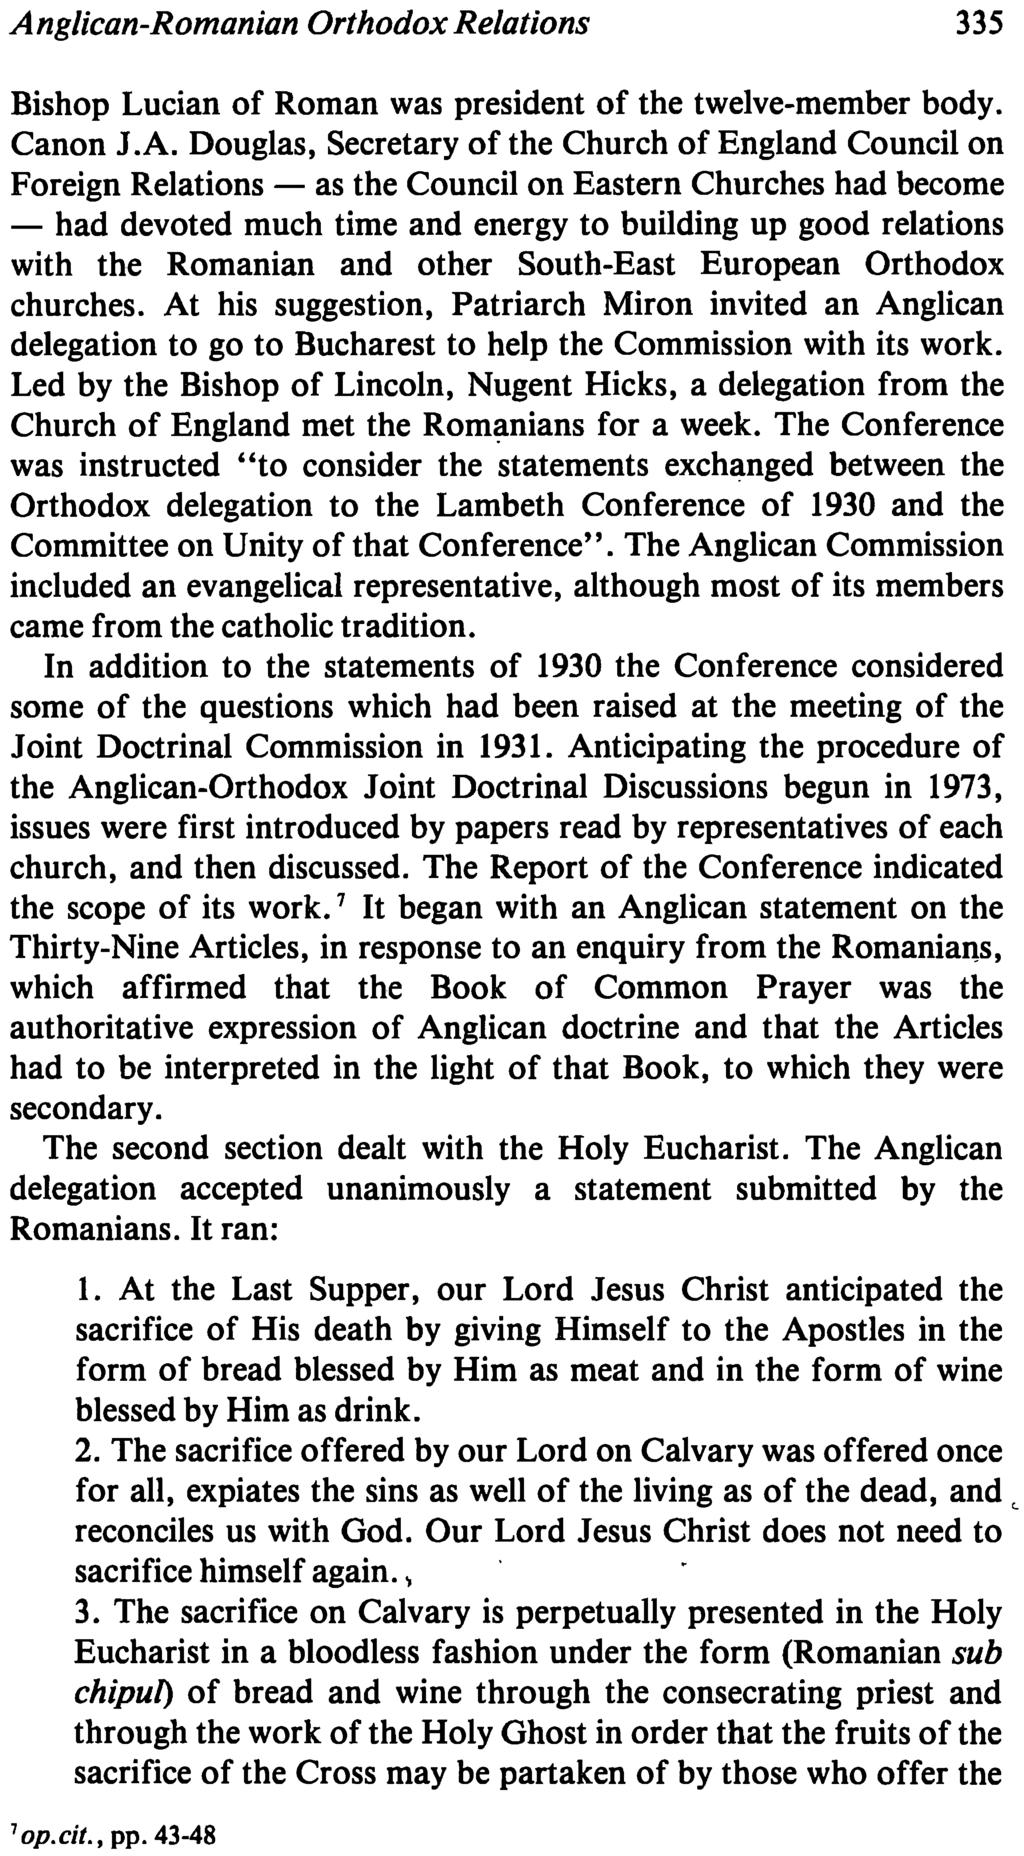 Anglican-Romanian Orthodox Relations 335 Bishop Lucian of Roman was president of the twelve-member body. Canon J.A. Douglas, Secretary of the Church of England Council on Foreign Relations - as the